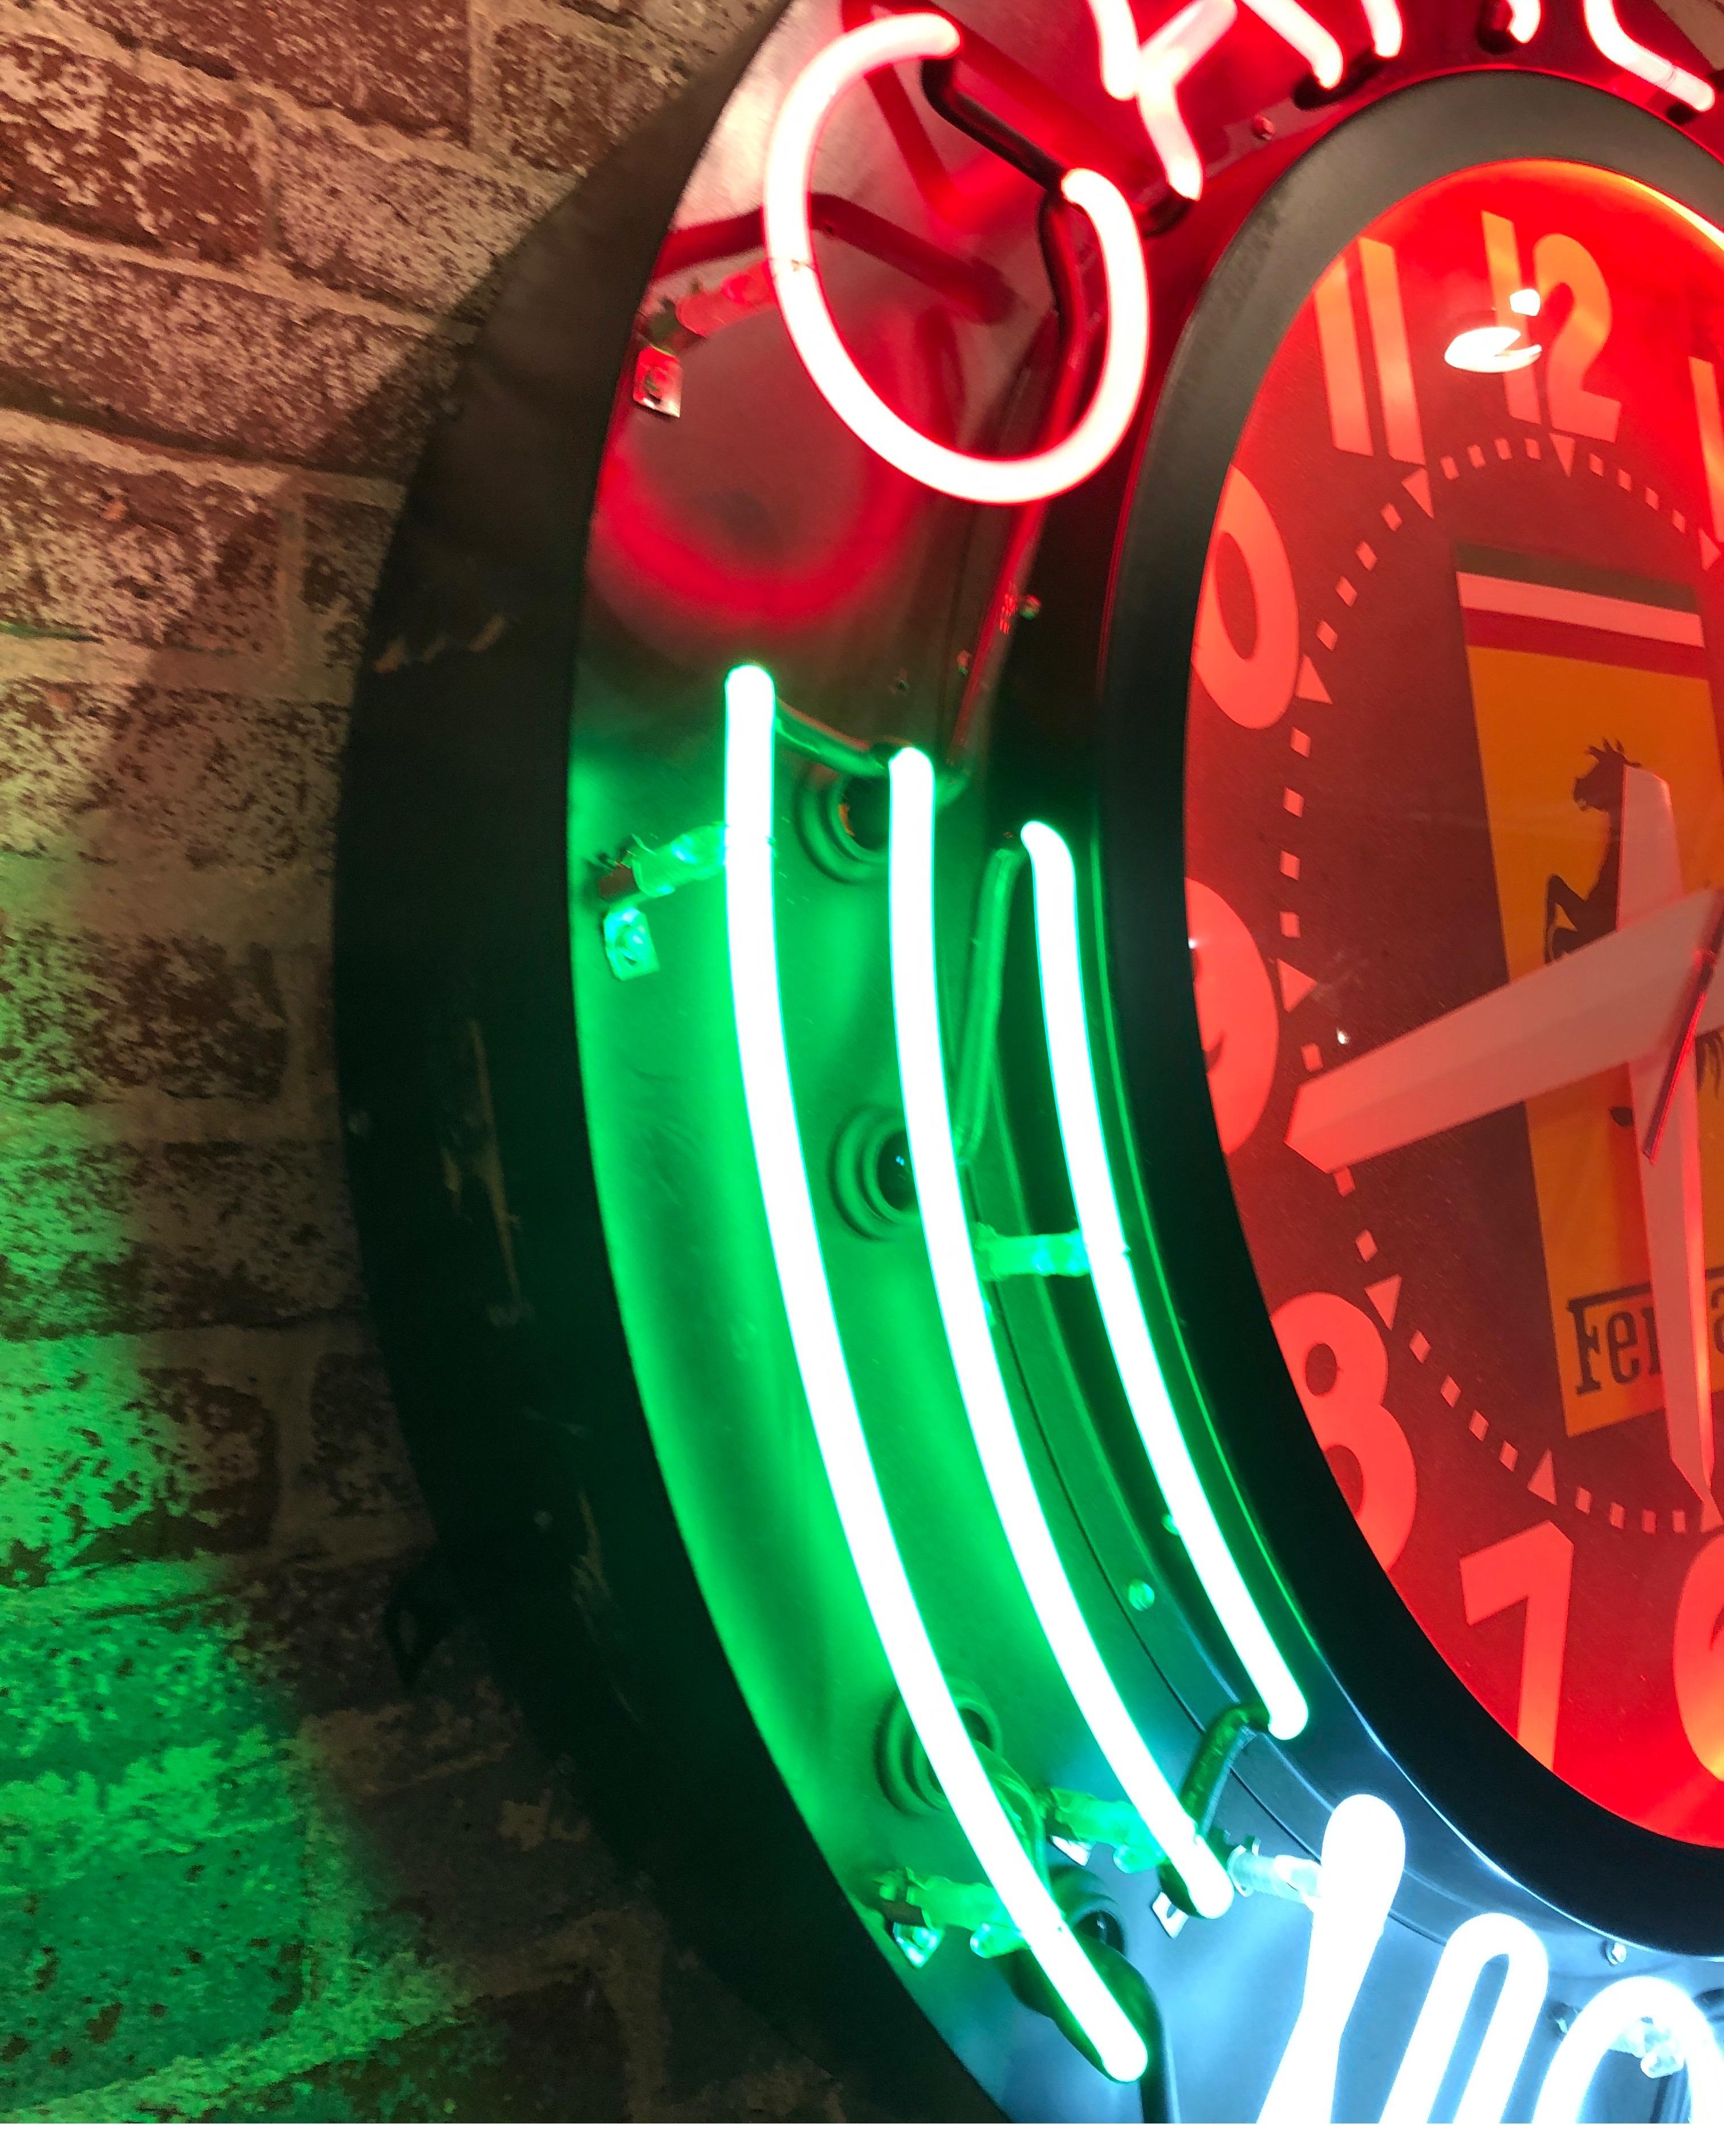 Large Ferrari logo neon sign and clock, circa 1980. In fantastic working condition with little to no damage. Clock is functioning well and all lights are bright and working. Amazing piece of vintage lighting for that special room!